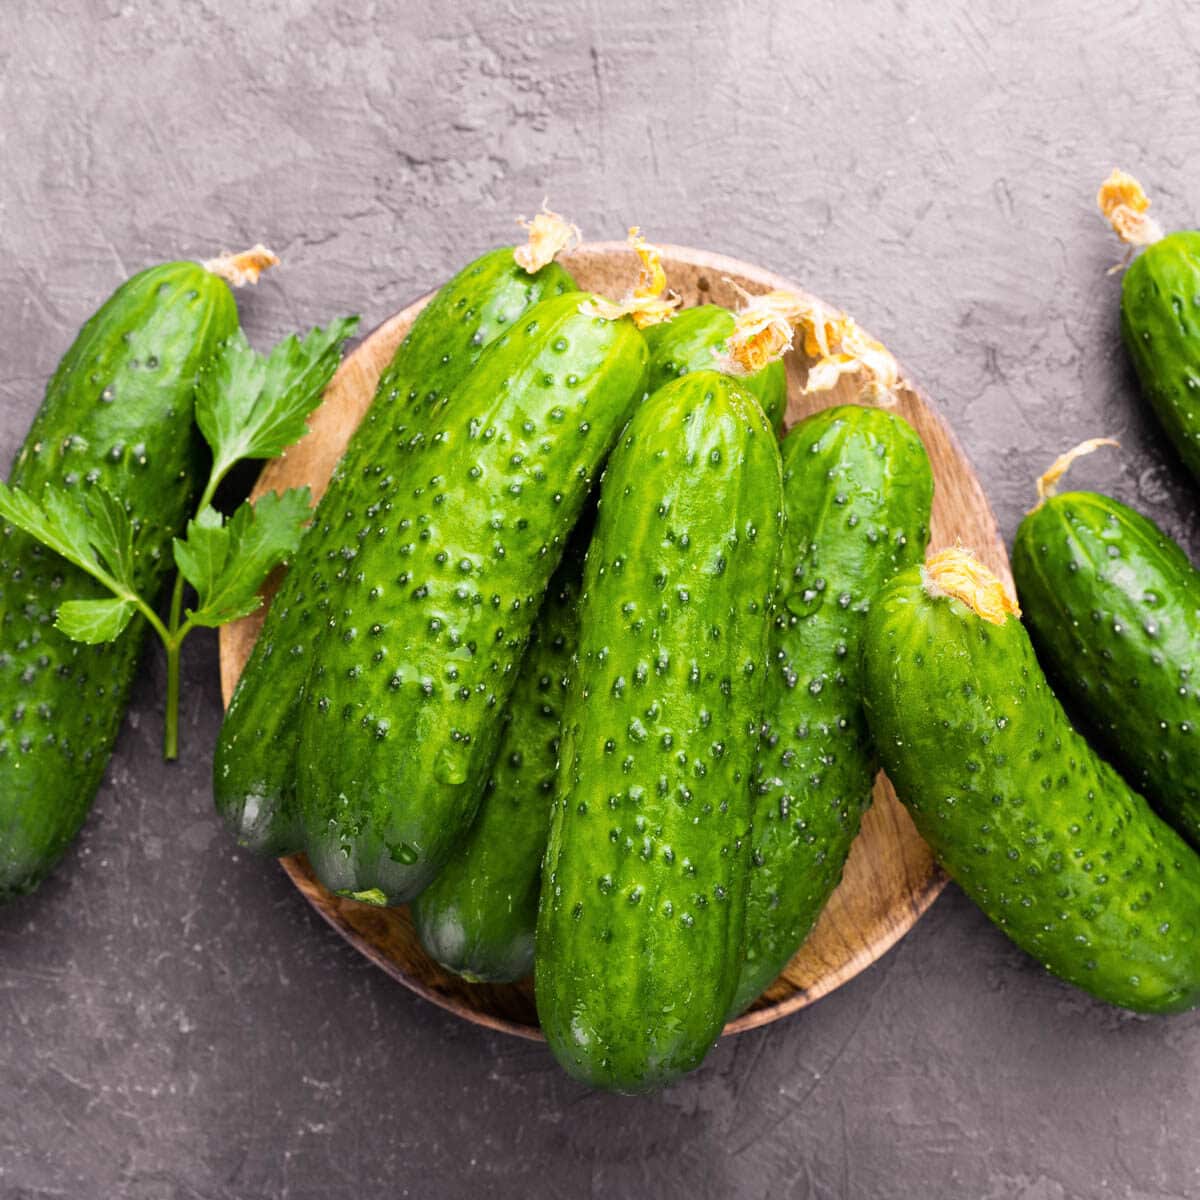 A Harvest of fresh cucumbers on a wooden platter.